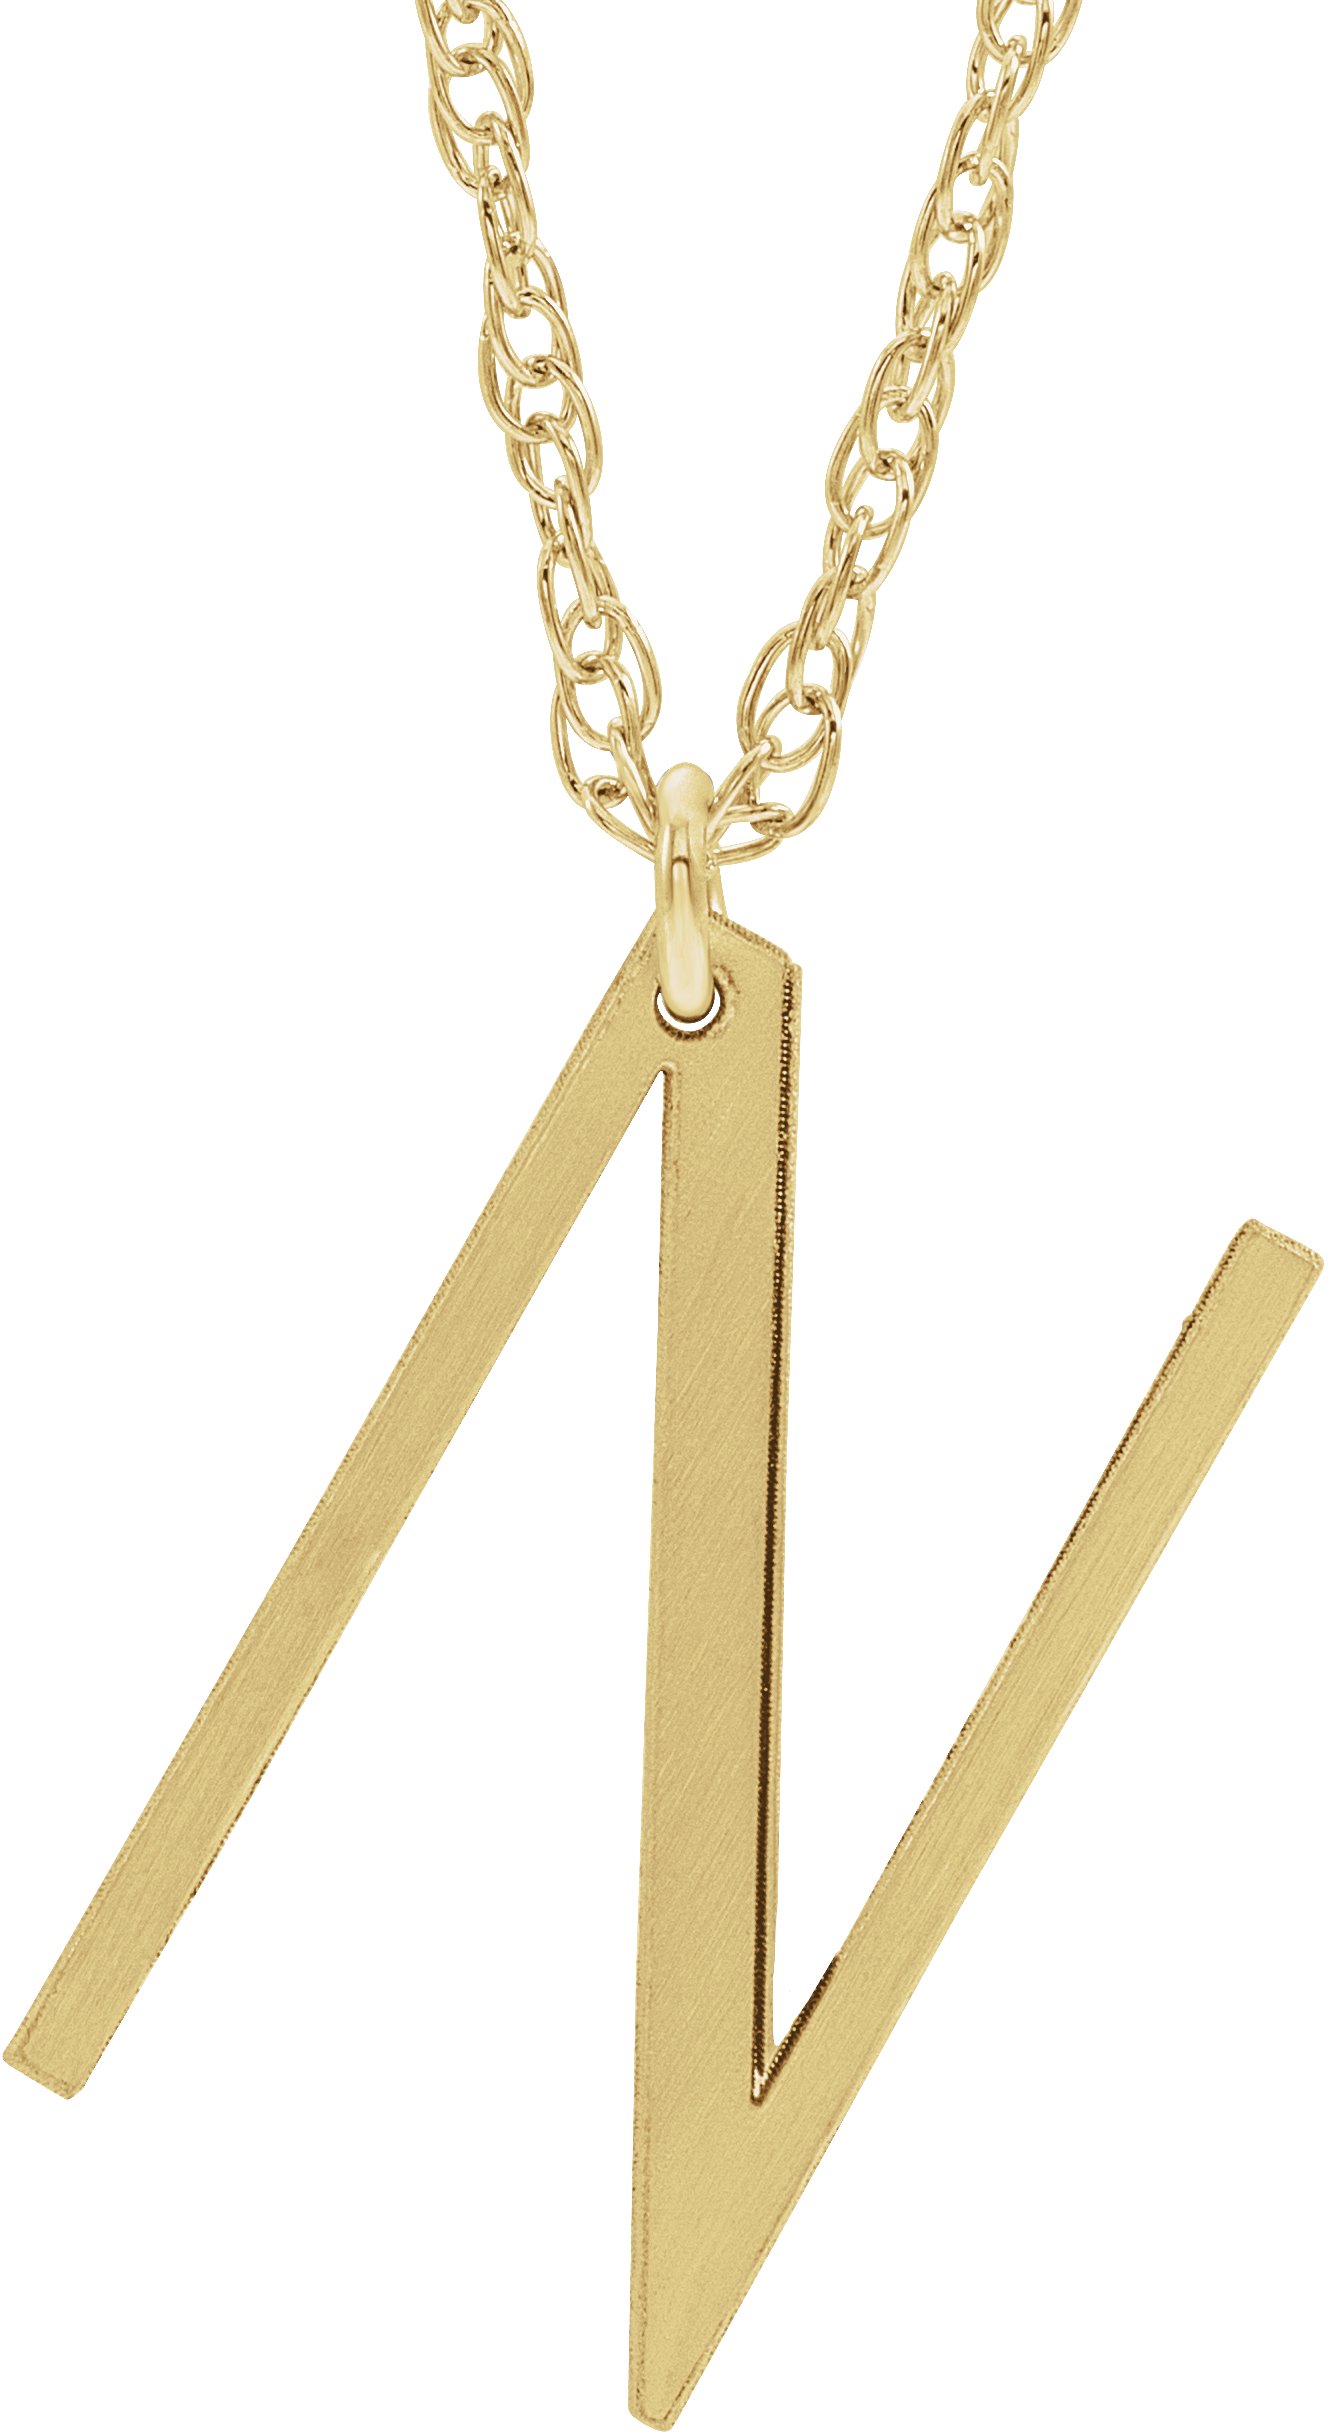 14K Yellow Gold-Plated Sterling Silver Block Initial N 16-18" Necklace with Brush Finish